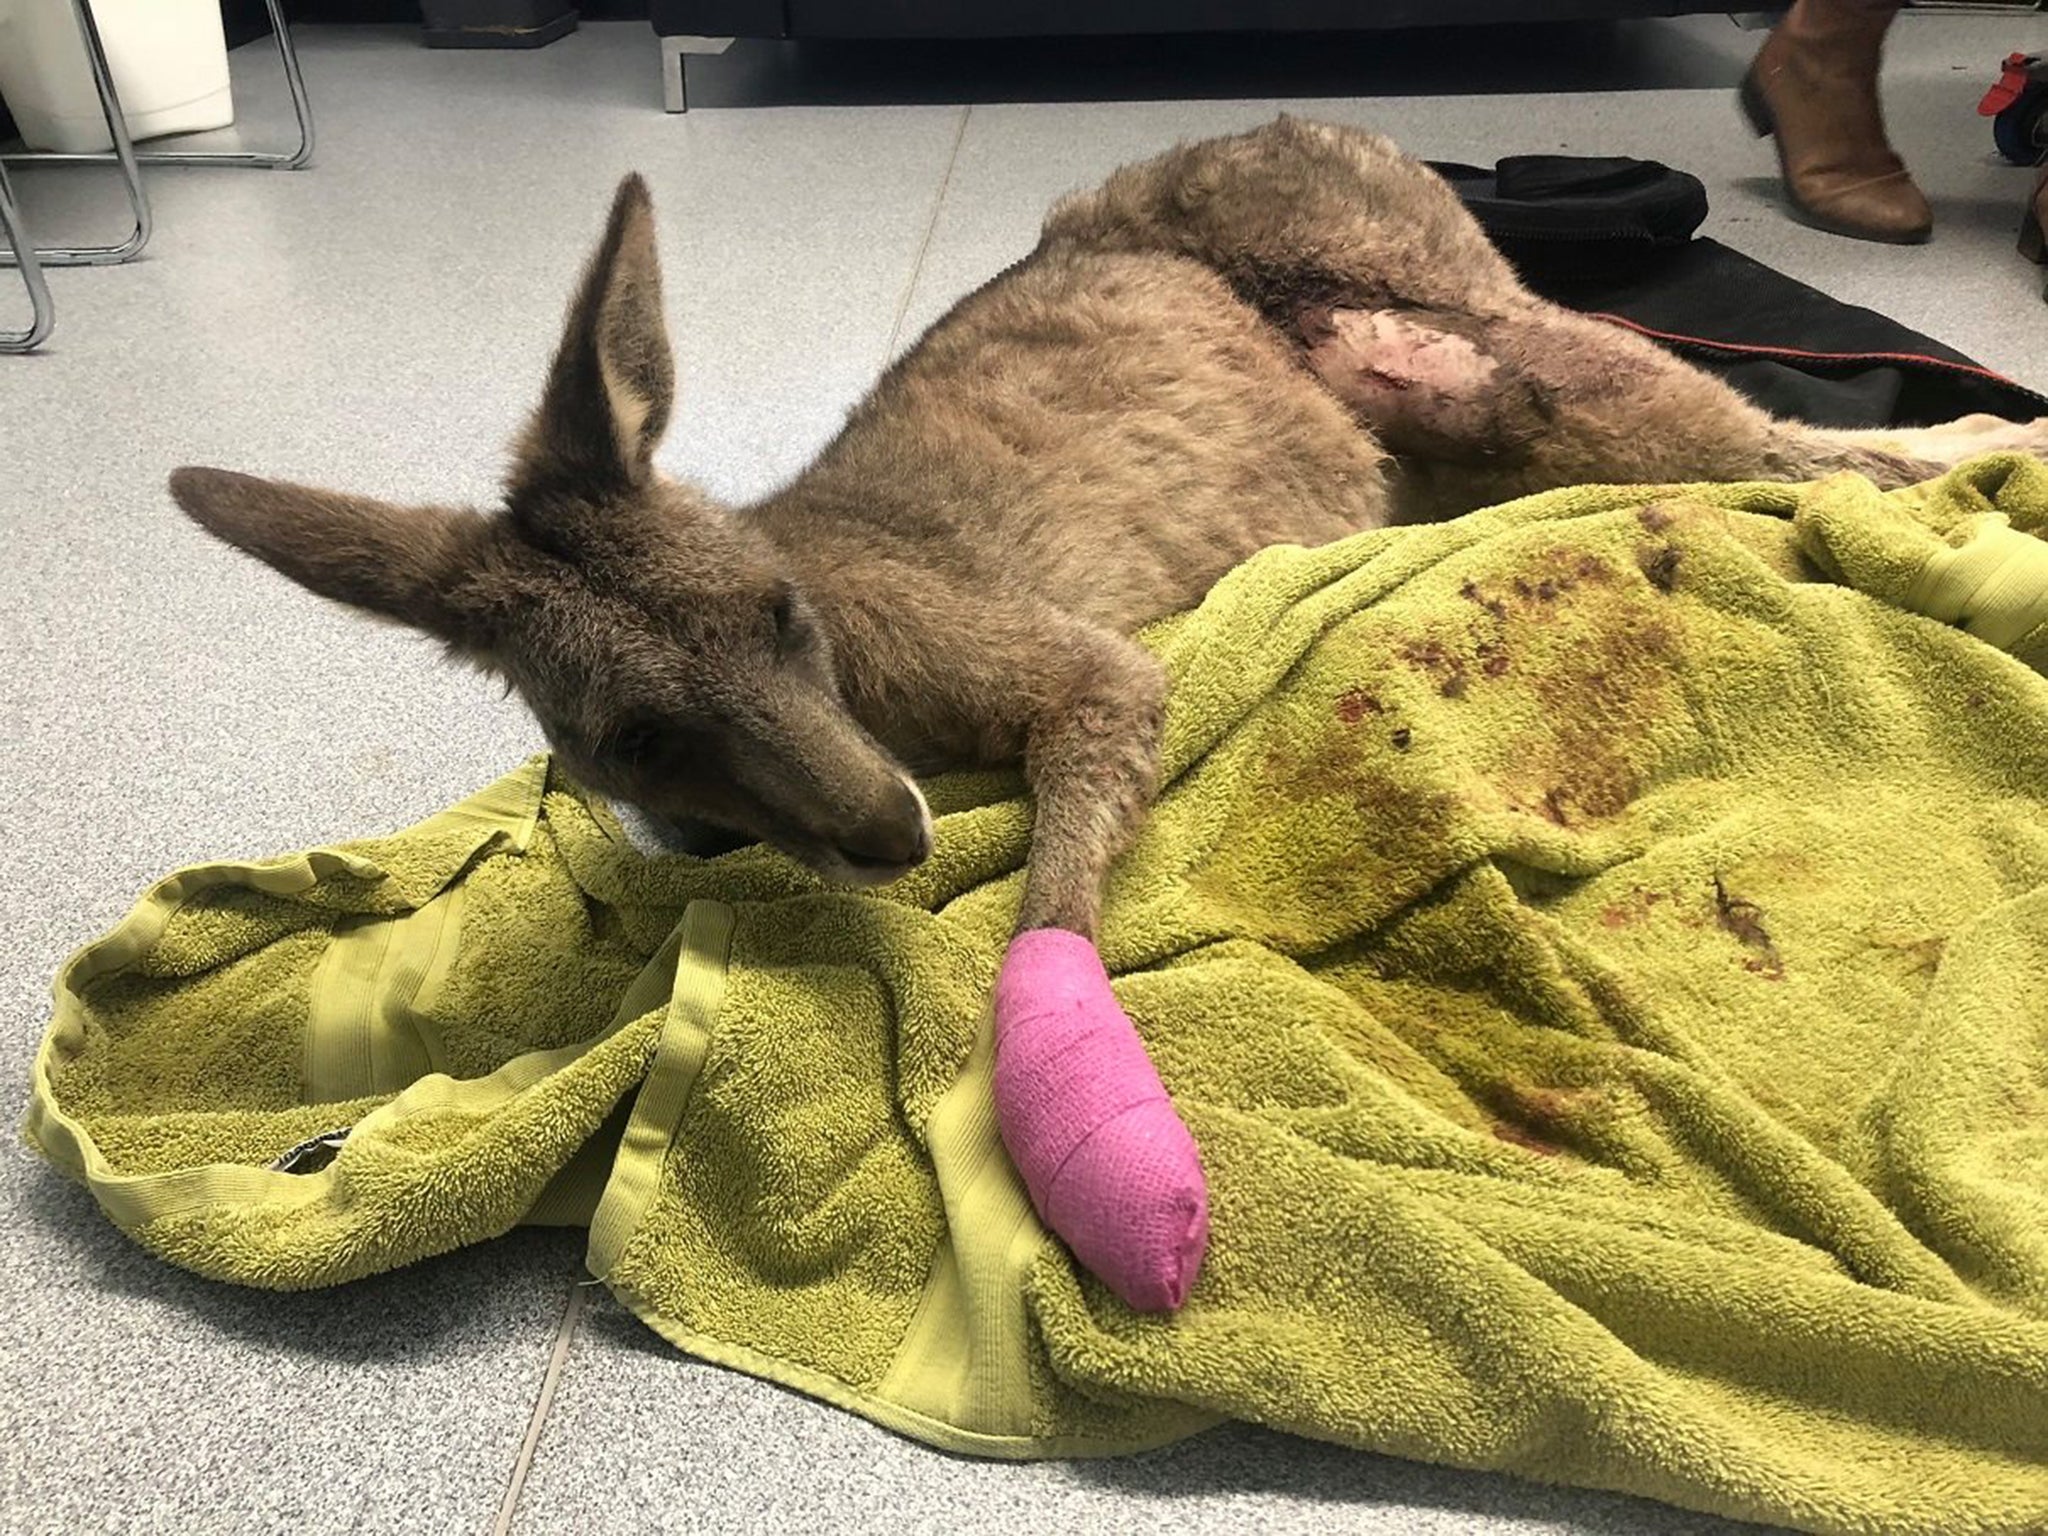 The kangaroo leapt over a 2.2m fence to escape.